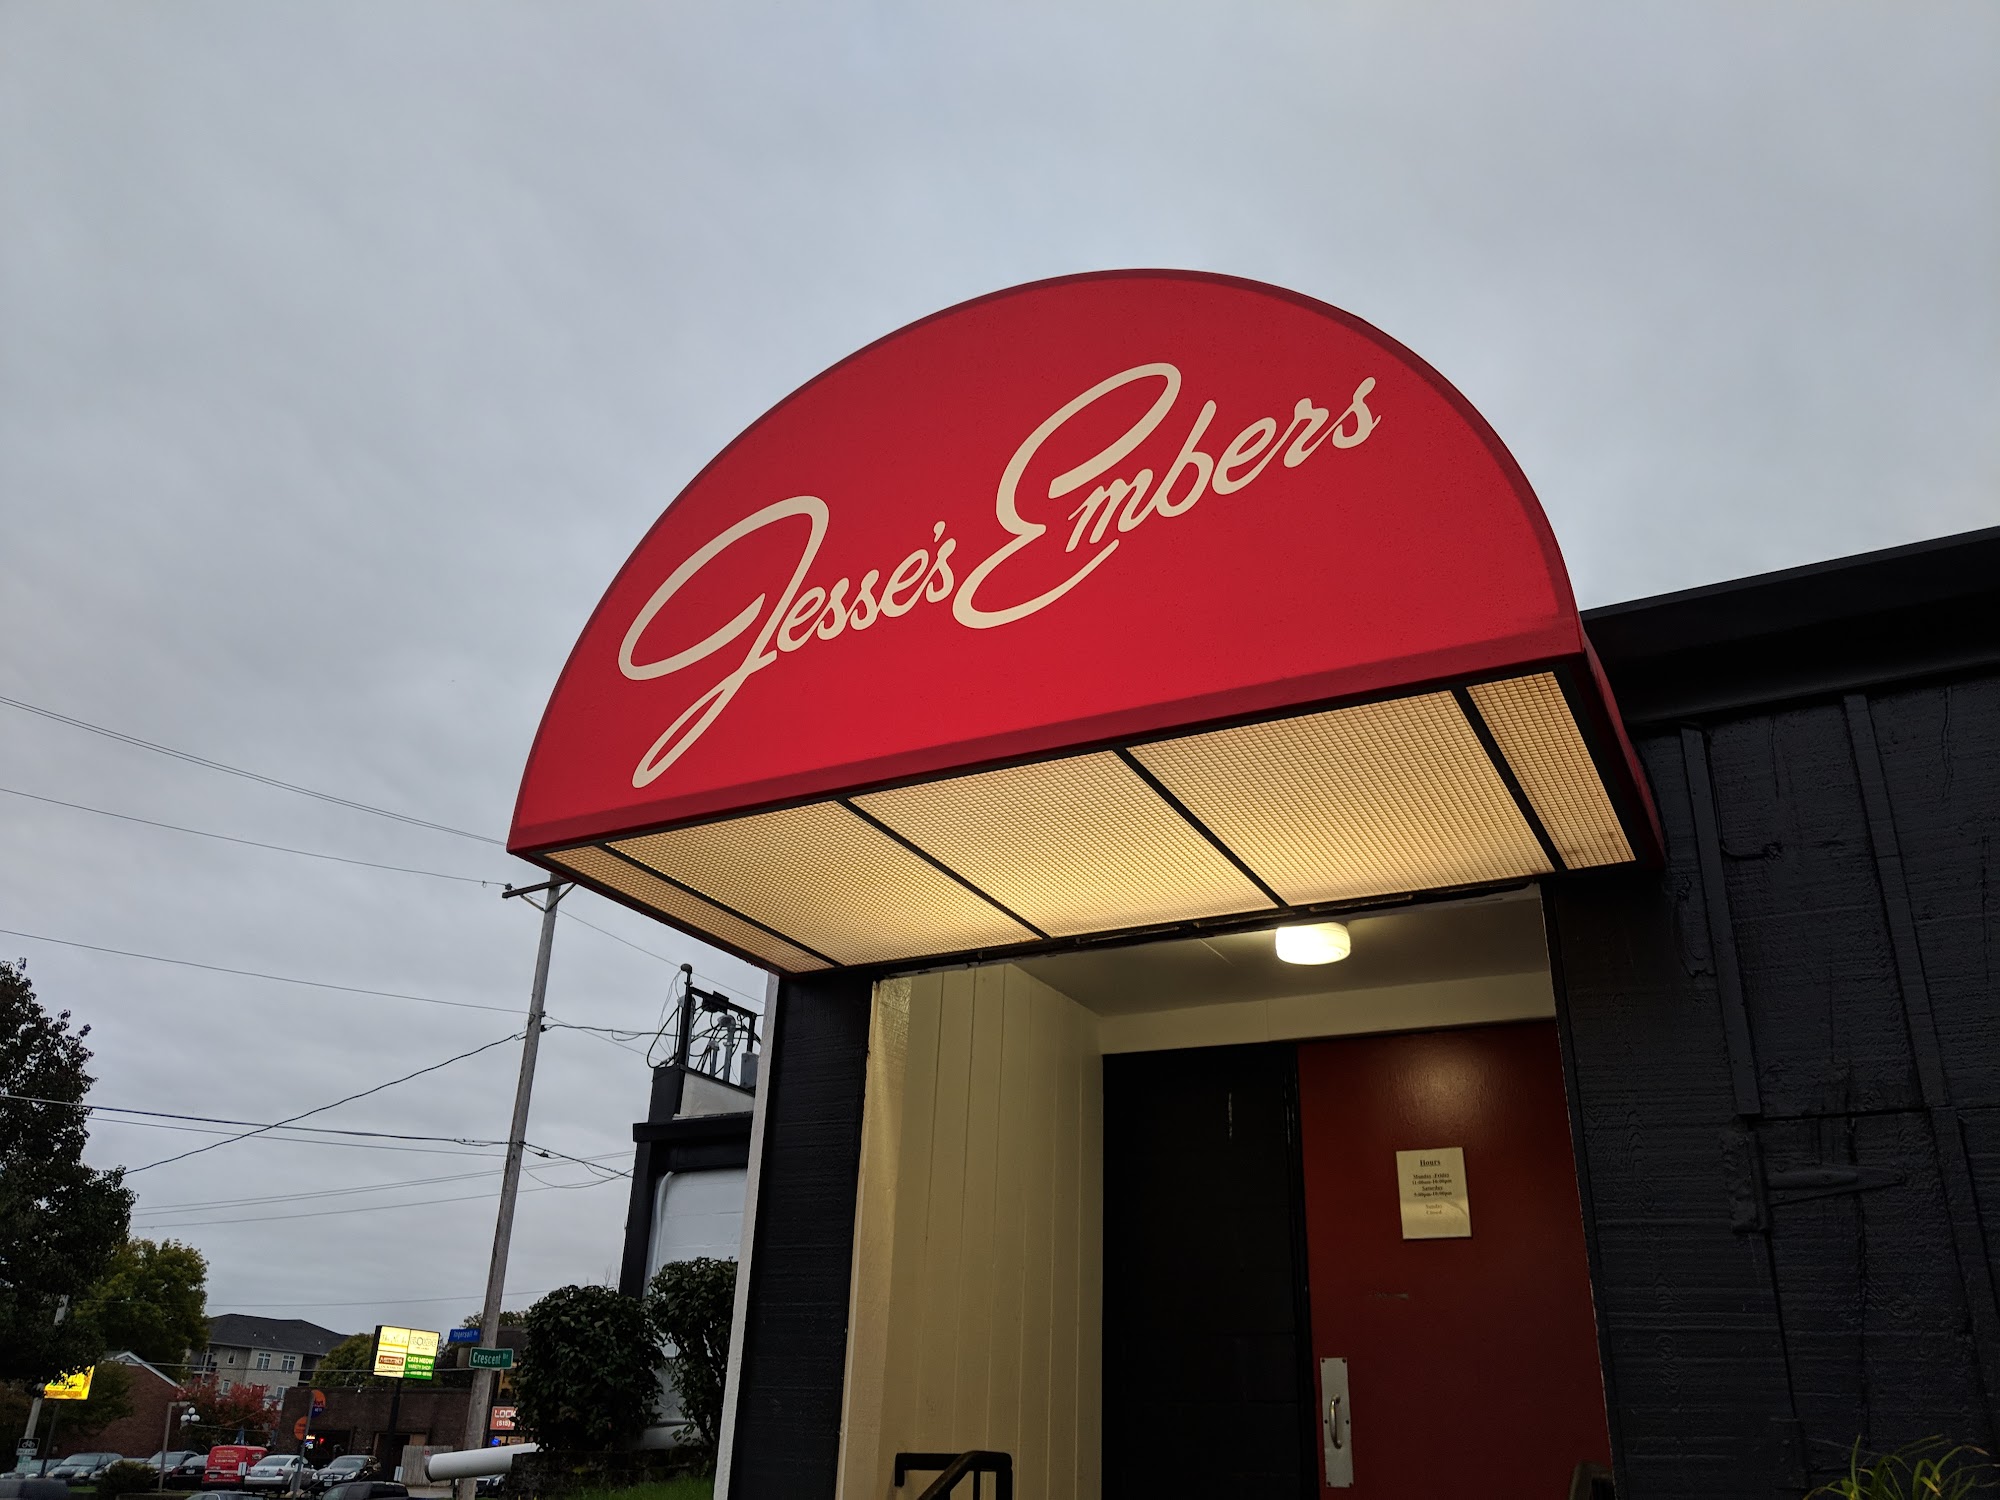 Jesse's Embers 3301 Ingersoll Ave, Des Moines, IA 50312